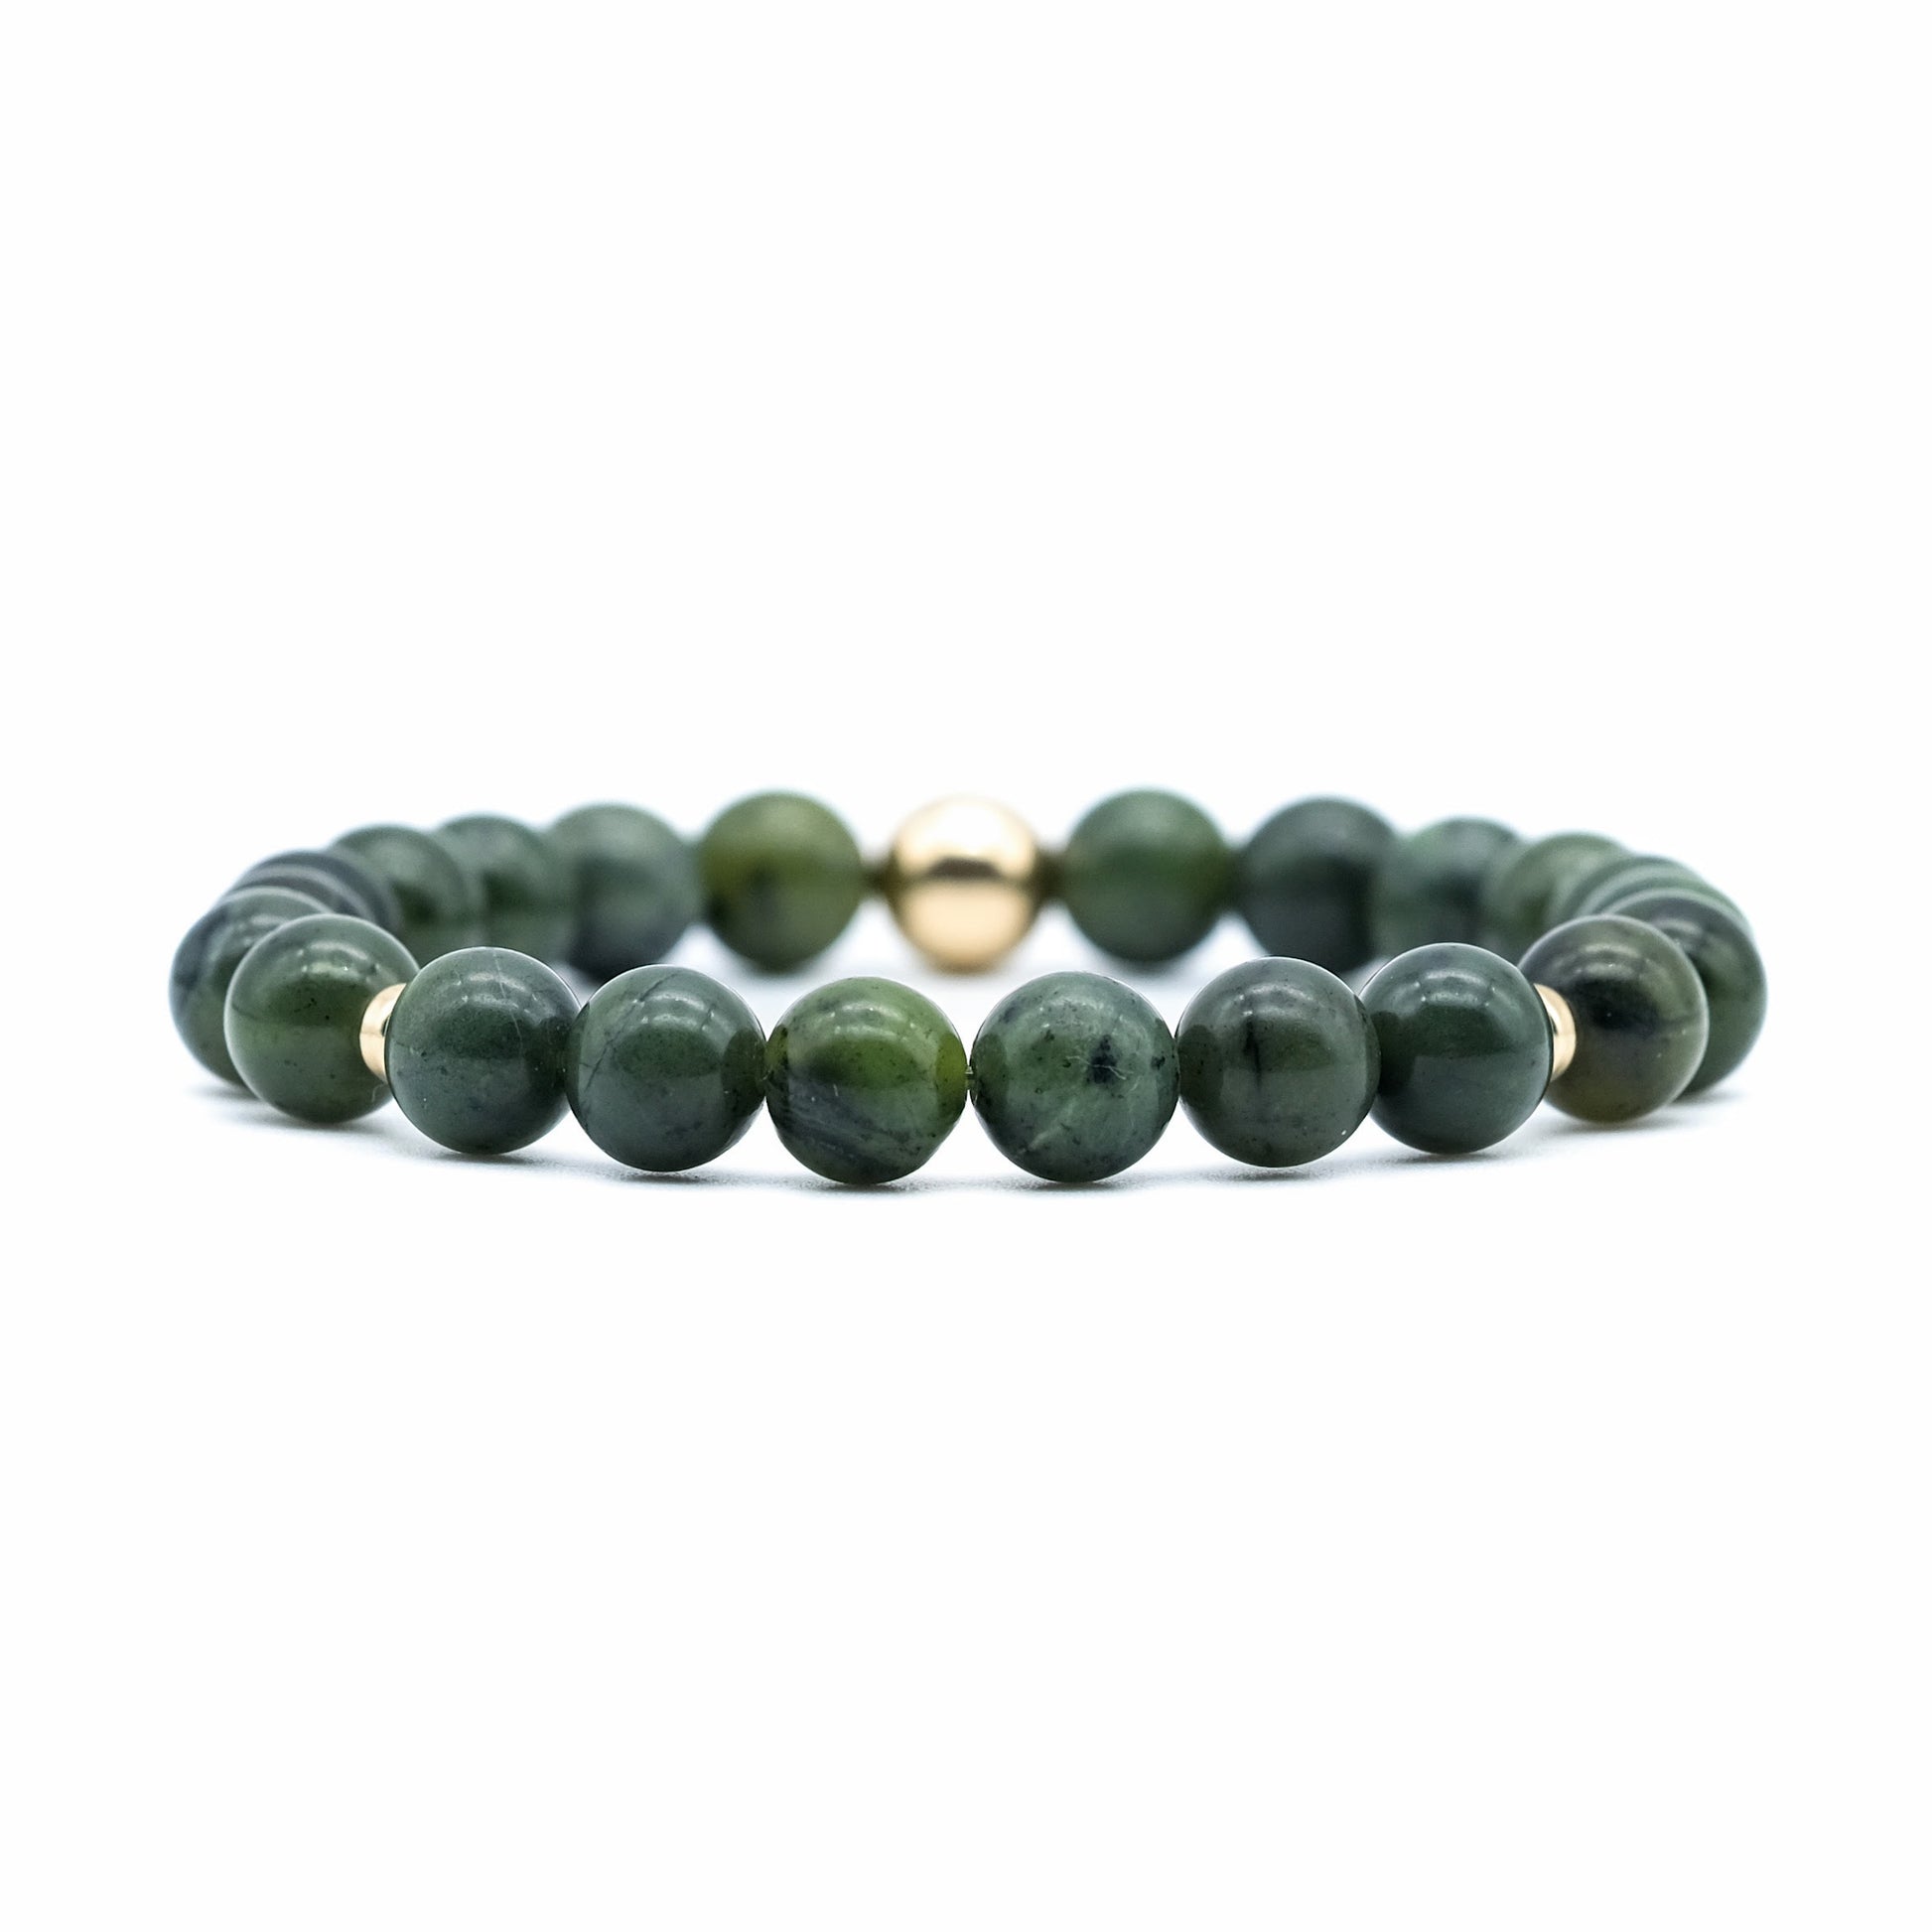 Jade bracelet with gold accessories 